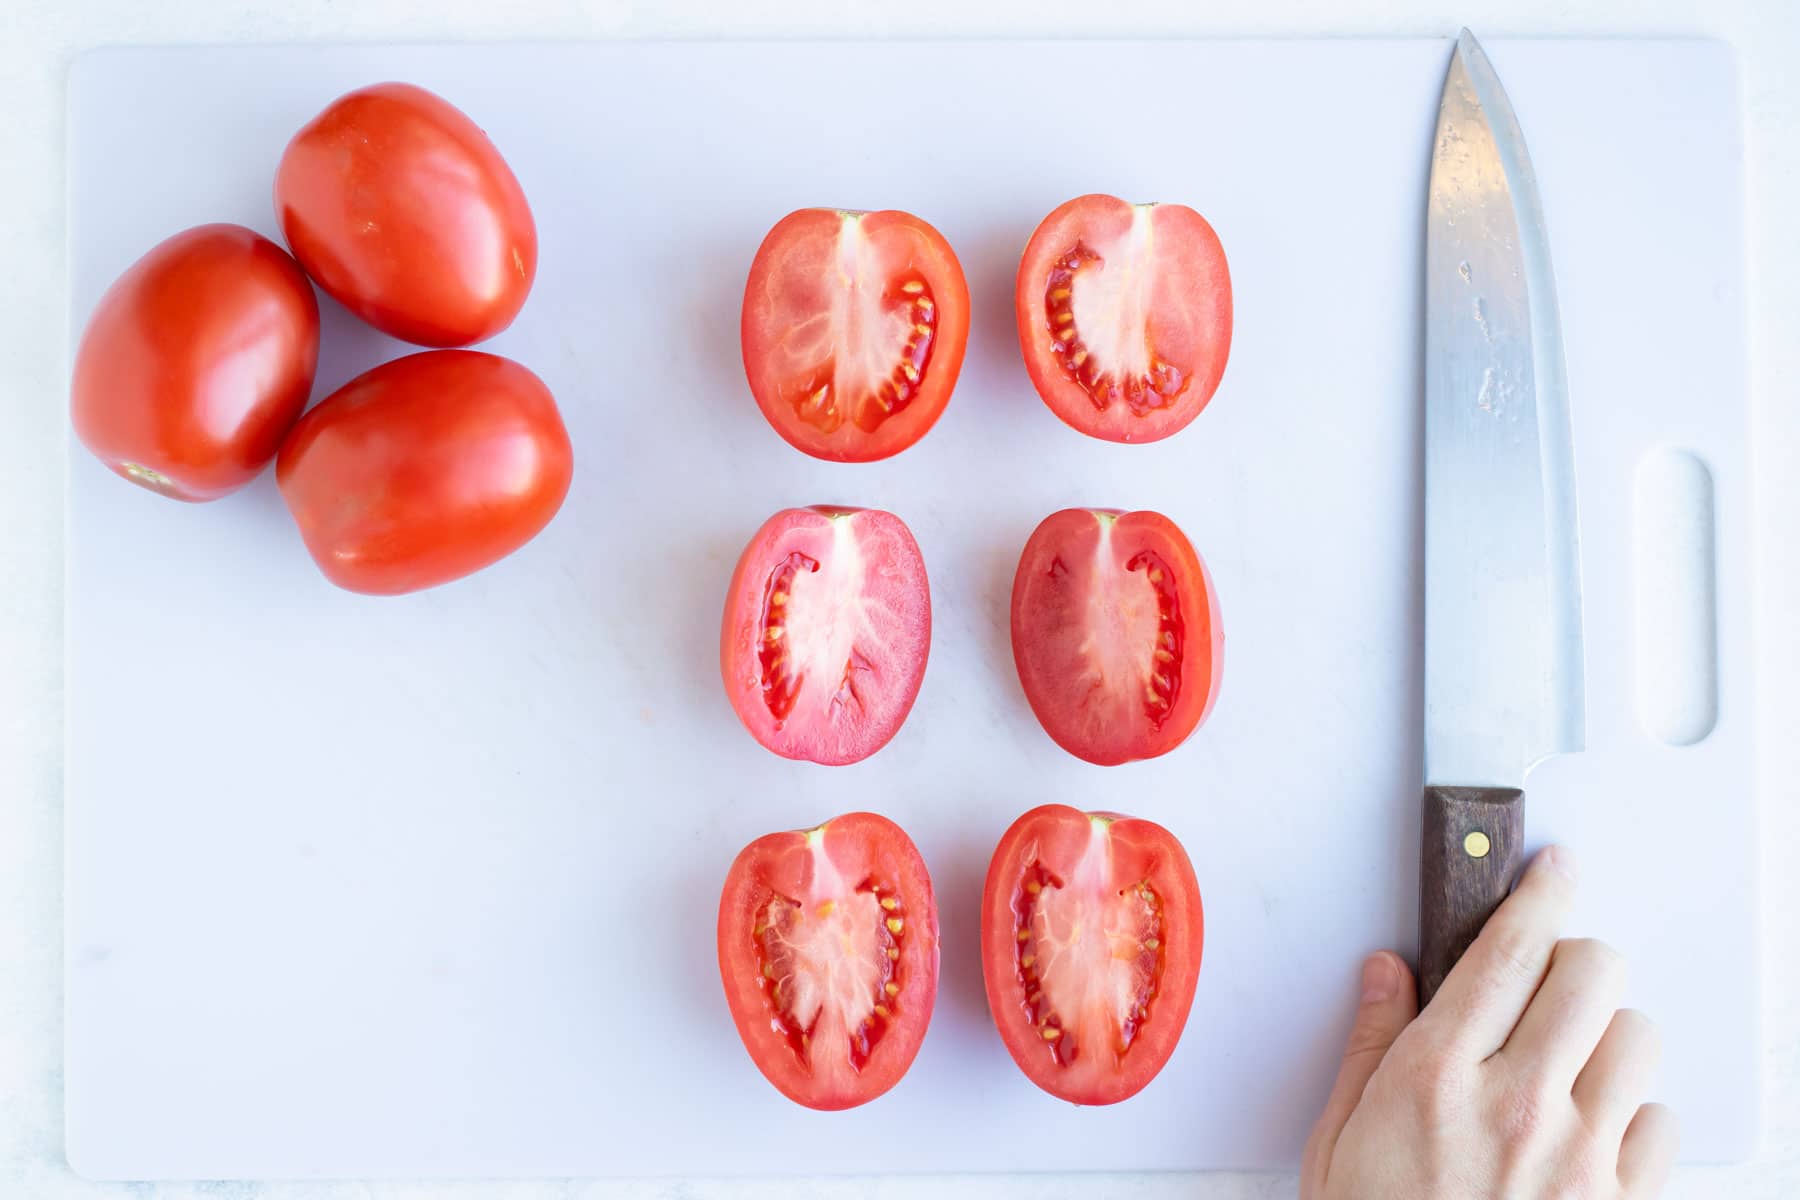 Halved tomatoes on a white cutting board next to a hand holding a knife.